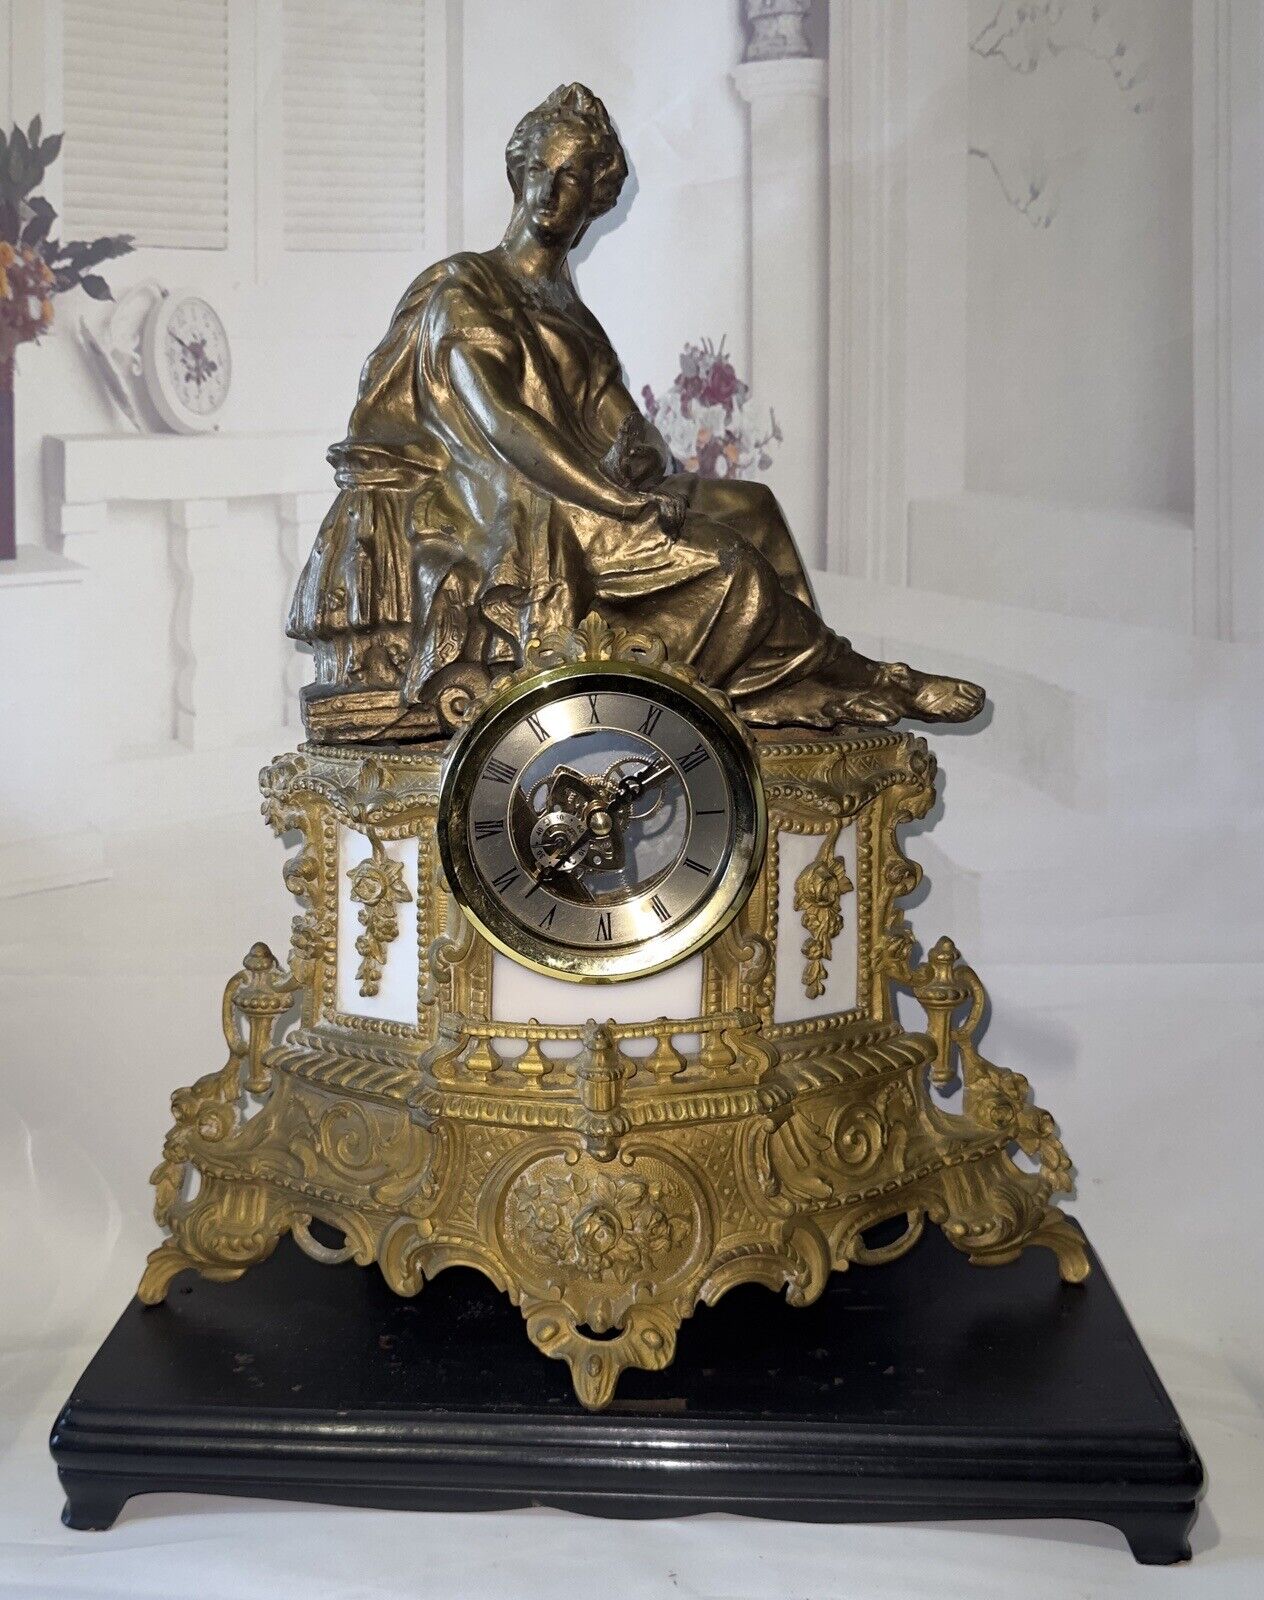 ON SALE NOW*FRENCH EMPIRE GOLD GUILD & MARBLE w SPELTER TOPPER* SOLD AS IS